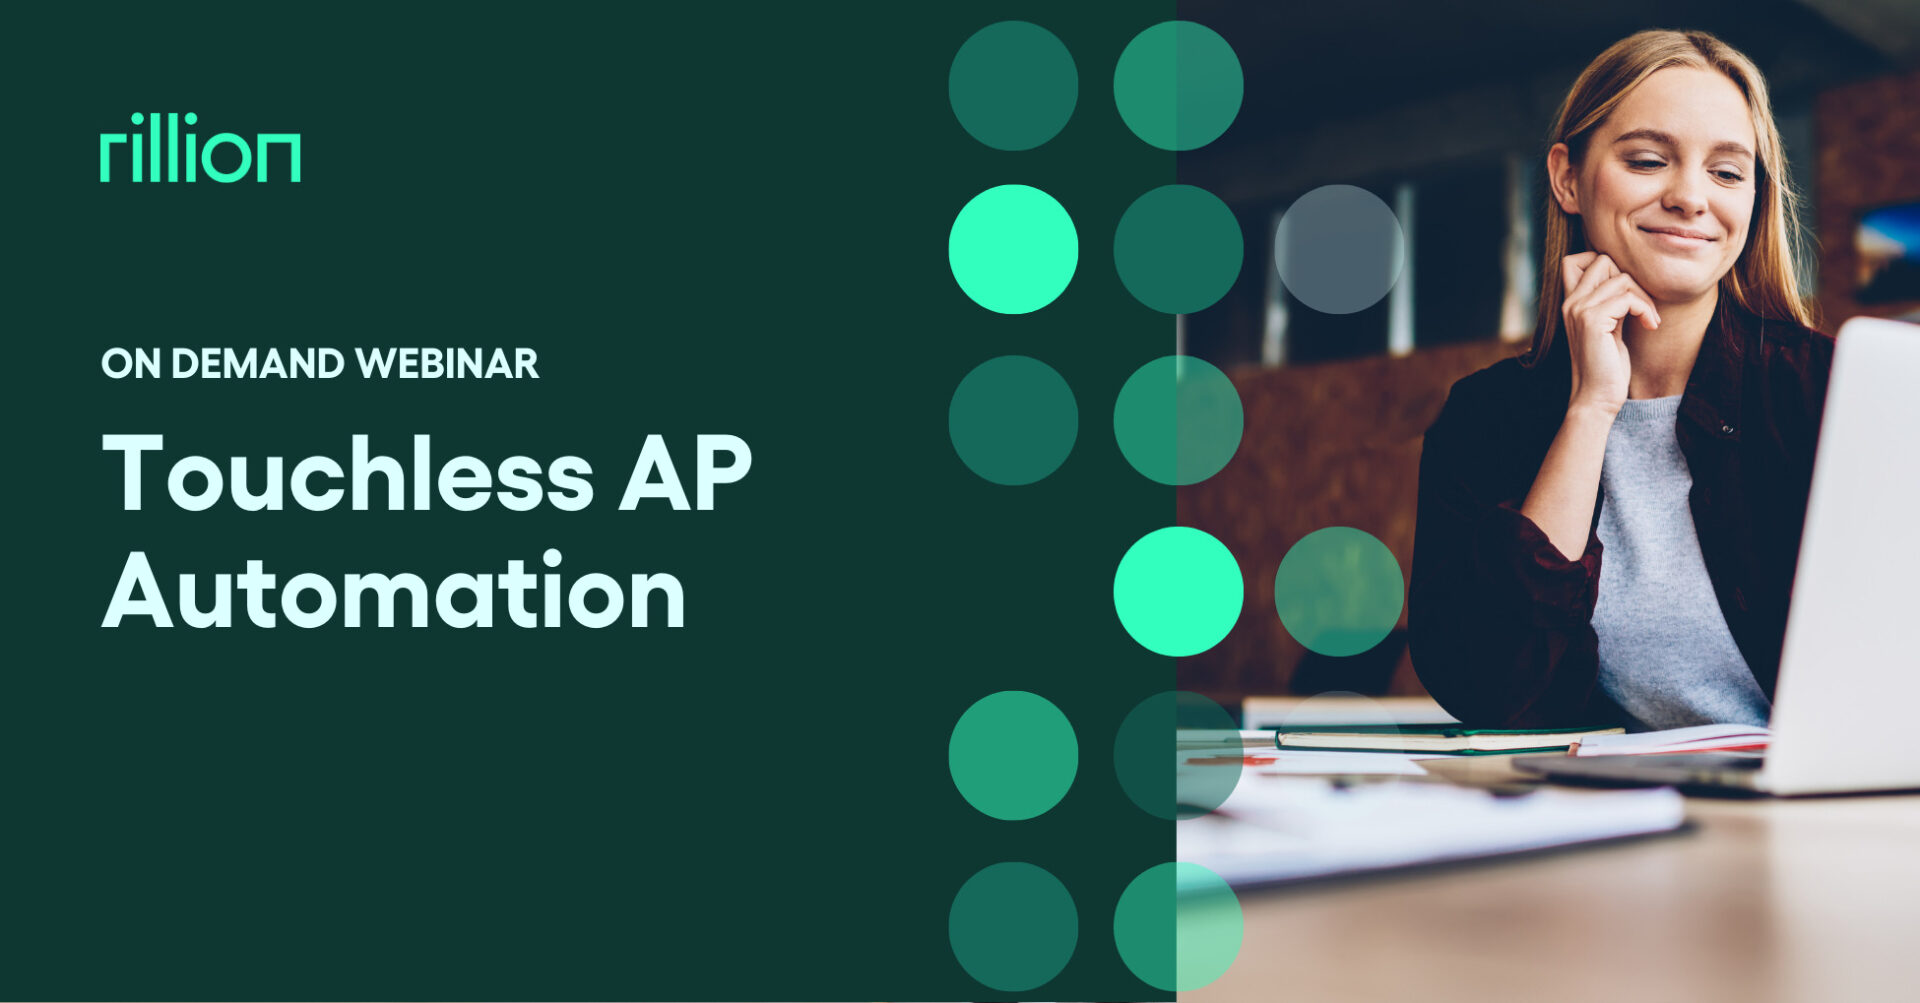 Touchless AP Automation - On Demand Webinar